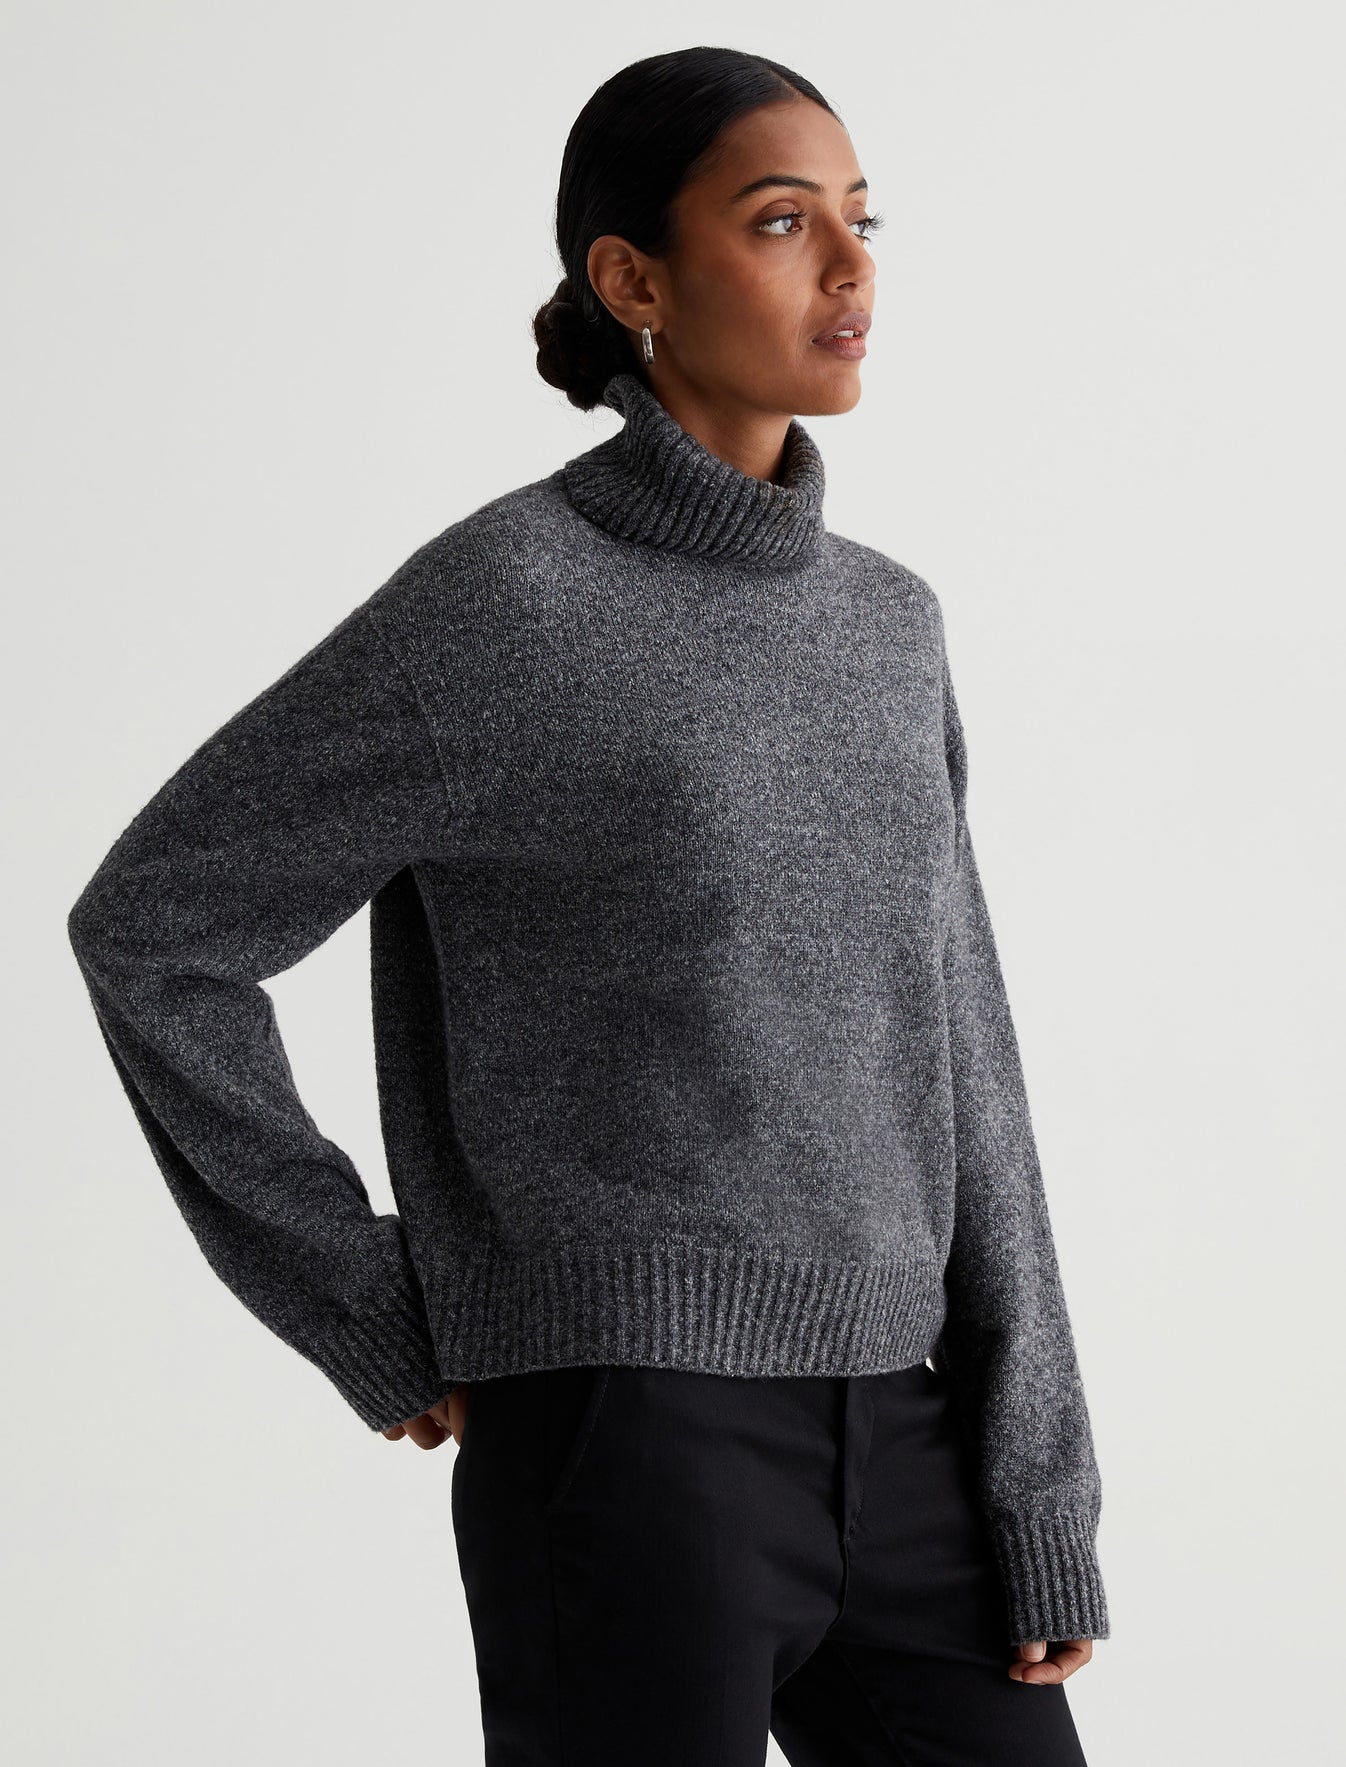 Bellona Heather Charcoal Relaxed Turtleneck Sweater Photo 1